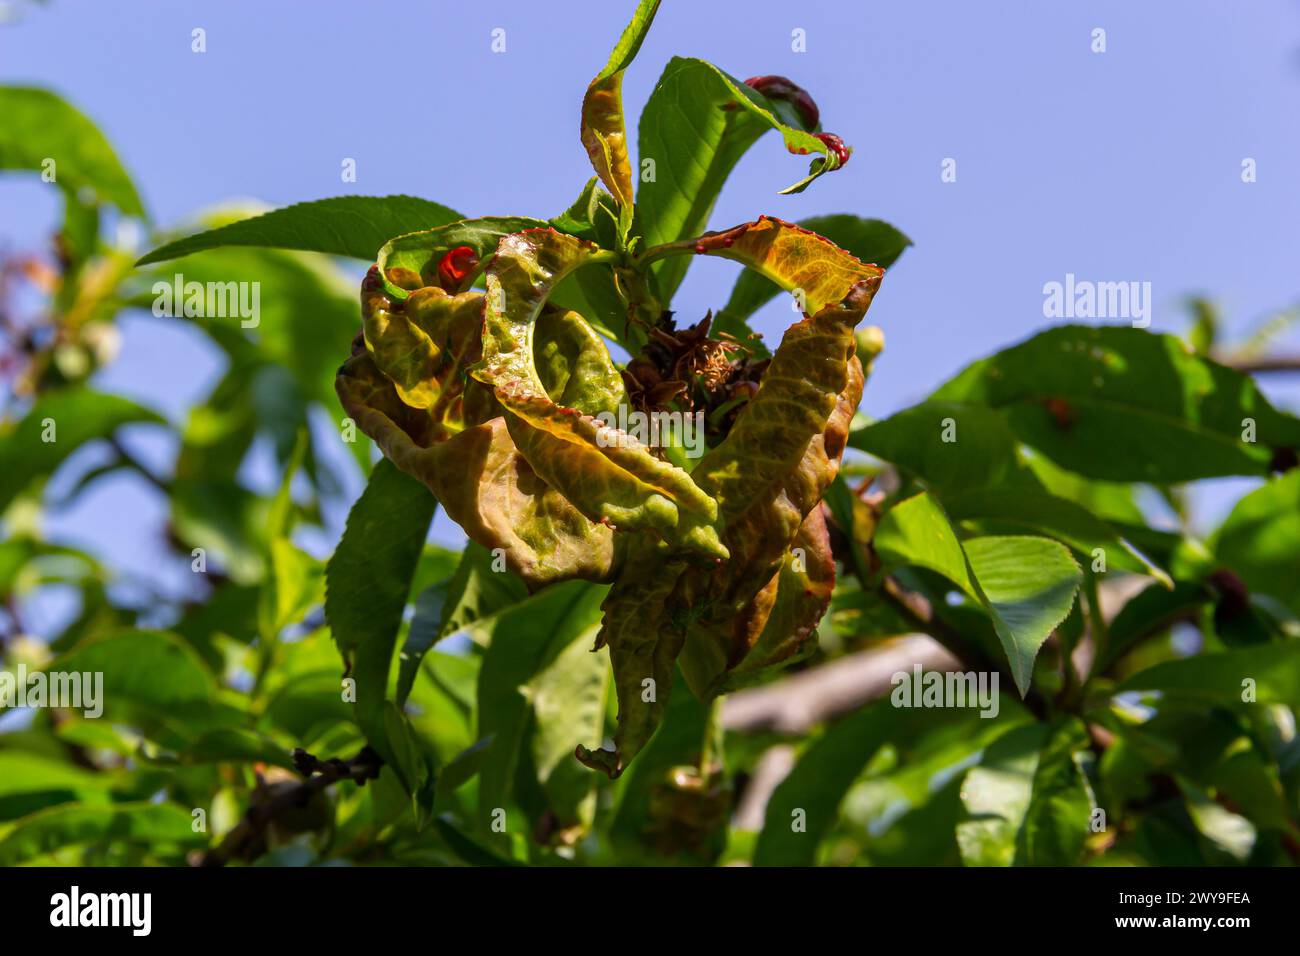 Peach leaf curl. Fungal disease of peaches tree. Taphrina deformans. Peach tree fungus disease. Selective focus. Topic - diseases and pests of fruit t Stock Photo